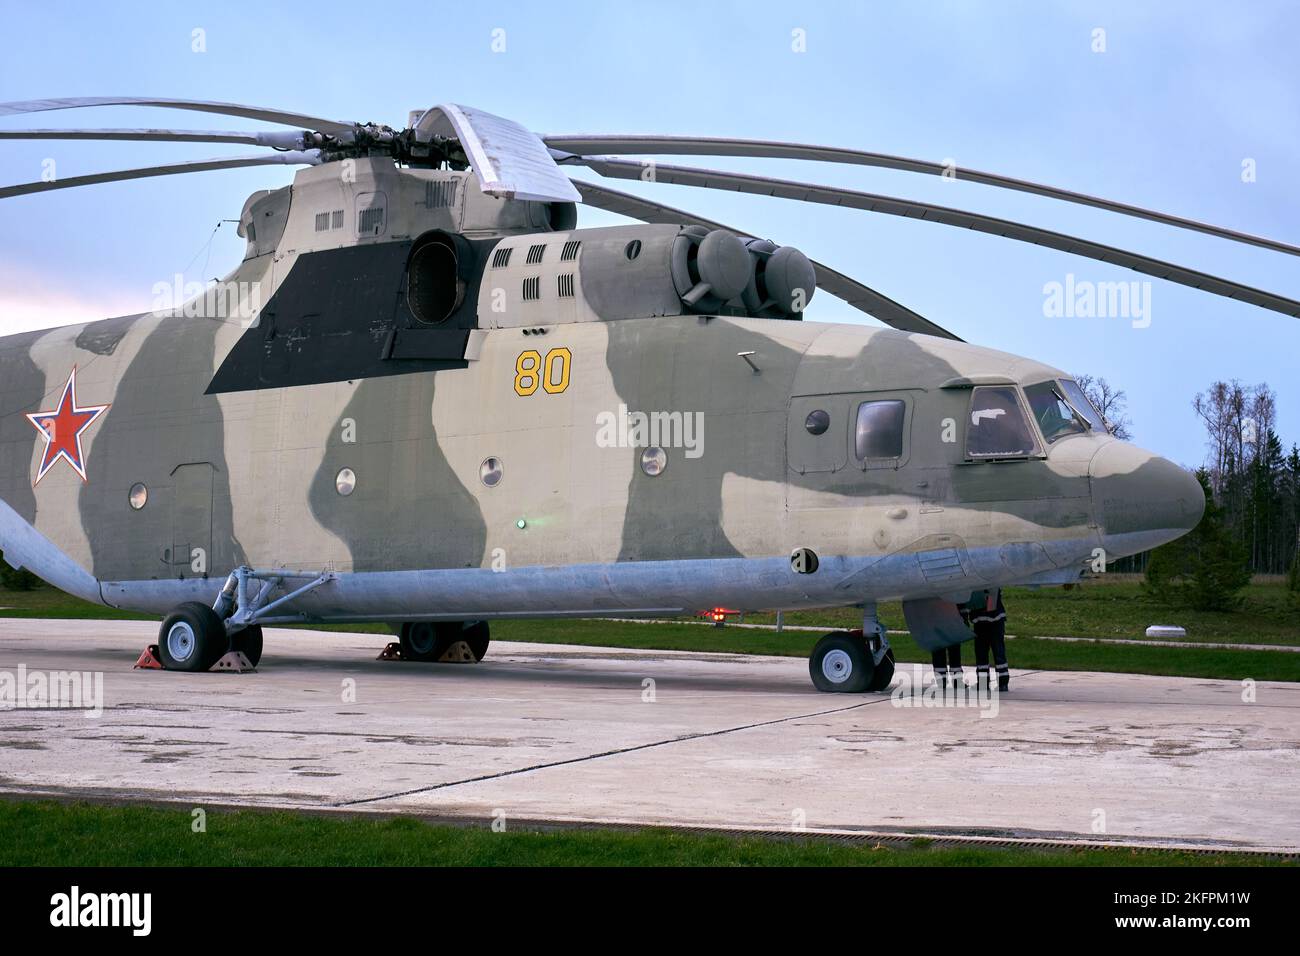 Russian military heavy transport helicopter Mil Mi-26 Stock Photo